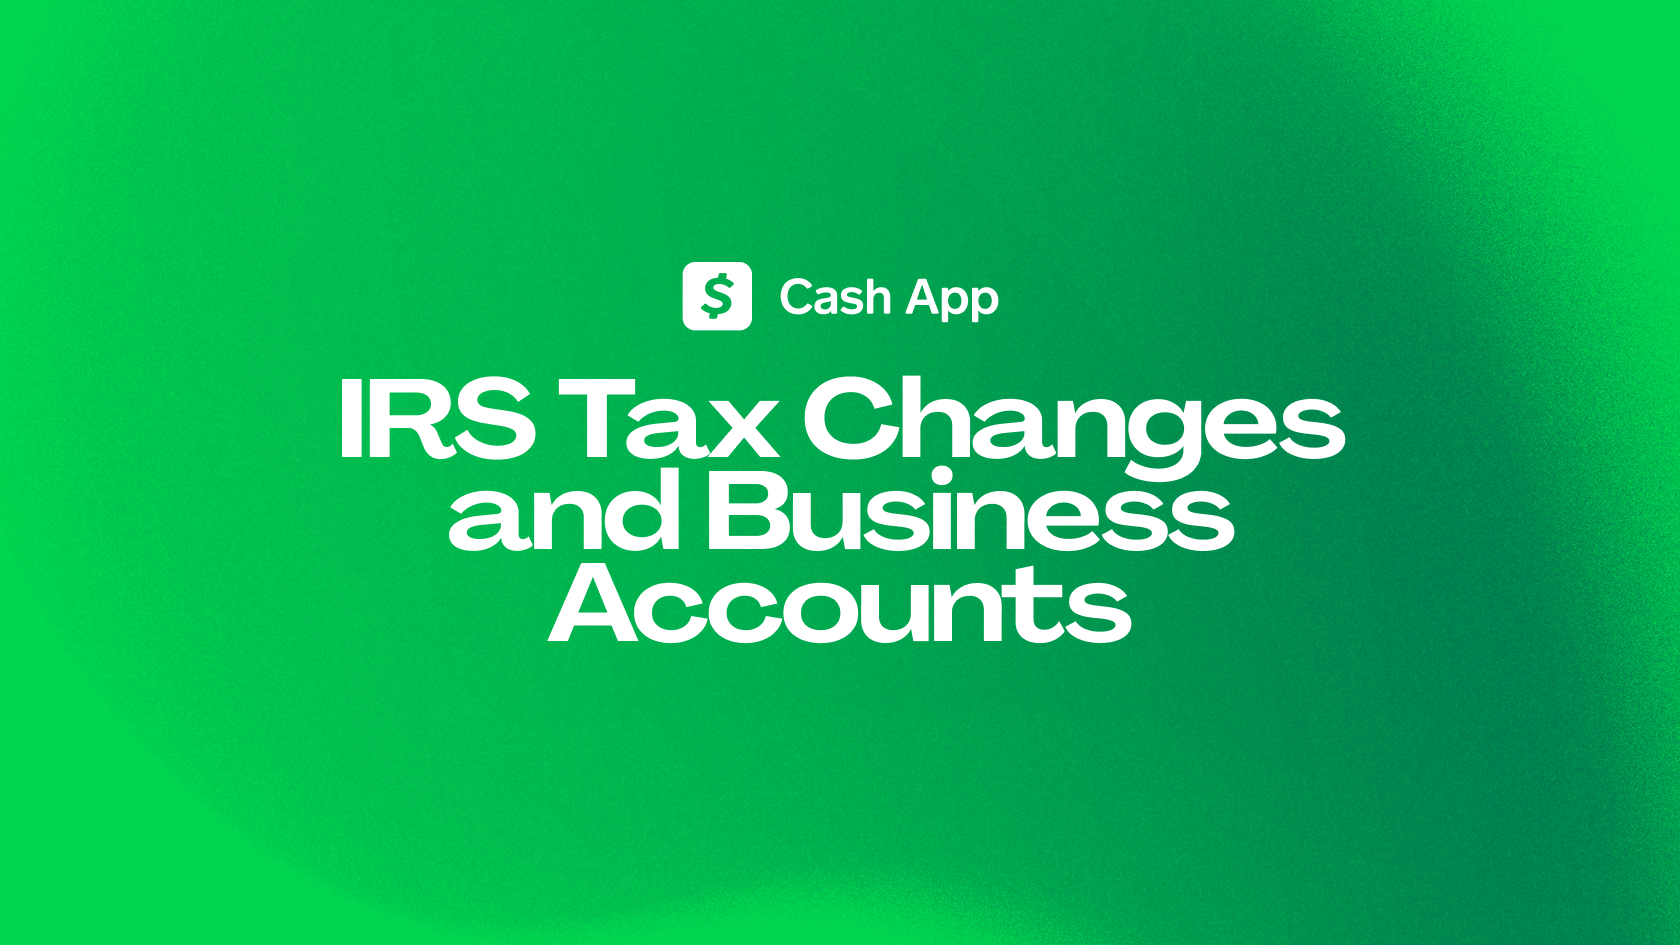 Cash App Taxes 2023 (Tax Year 2022) Review